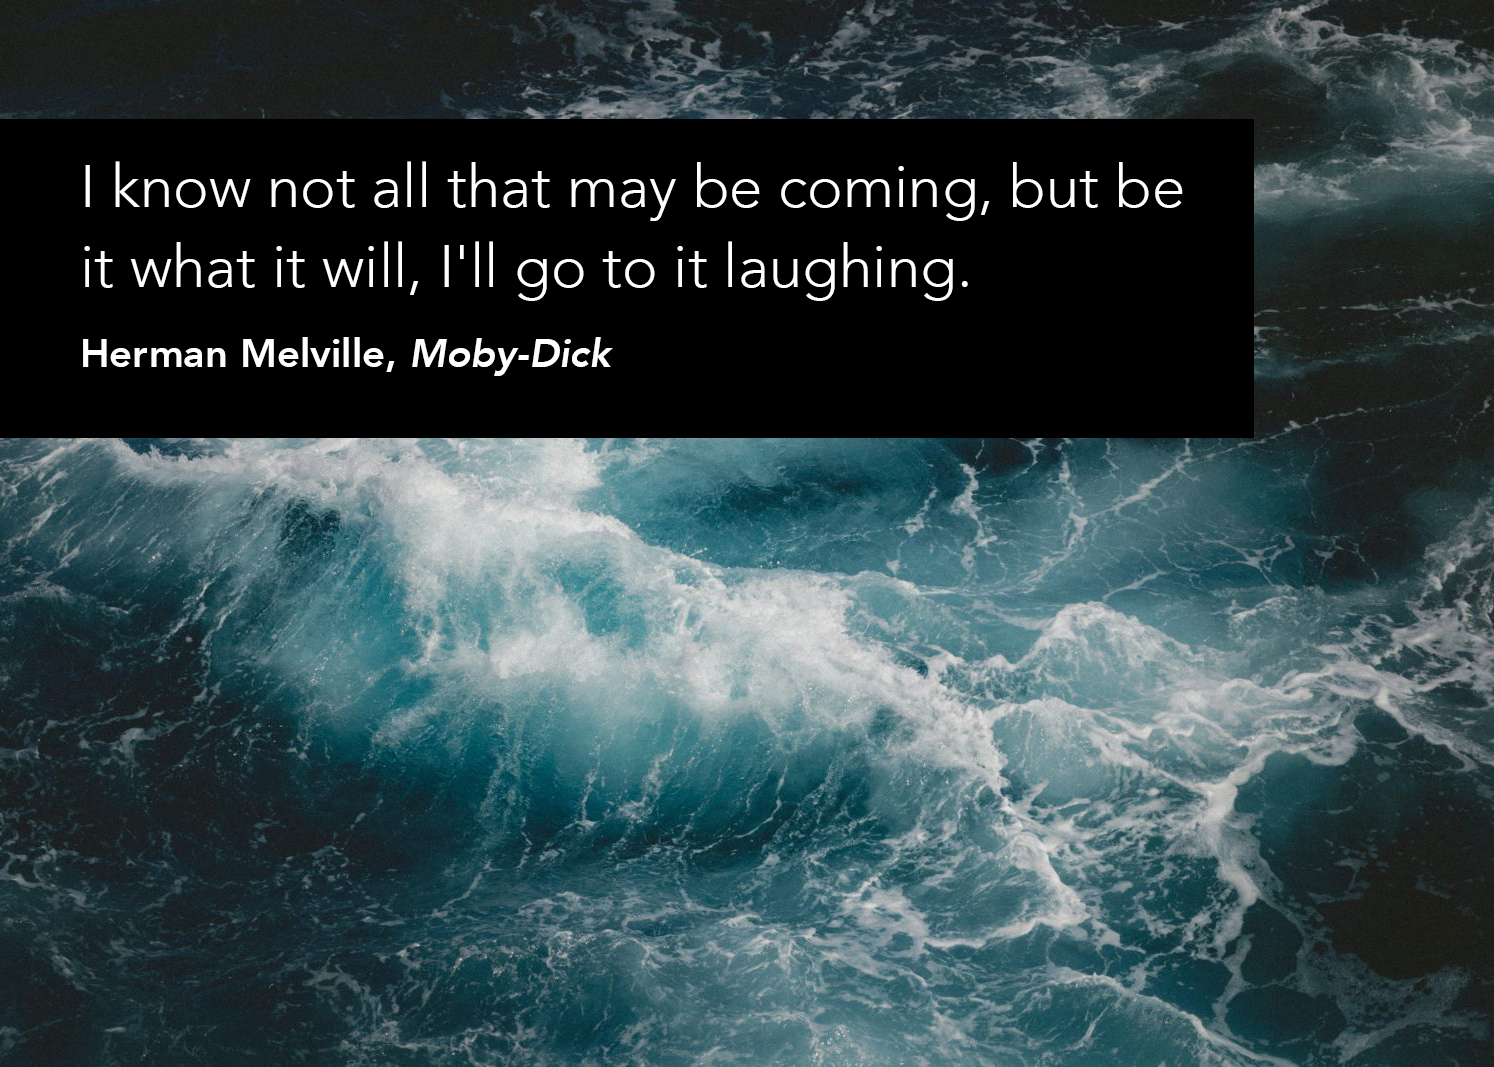 Moby Dick quote.